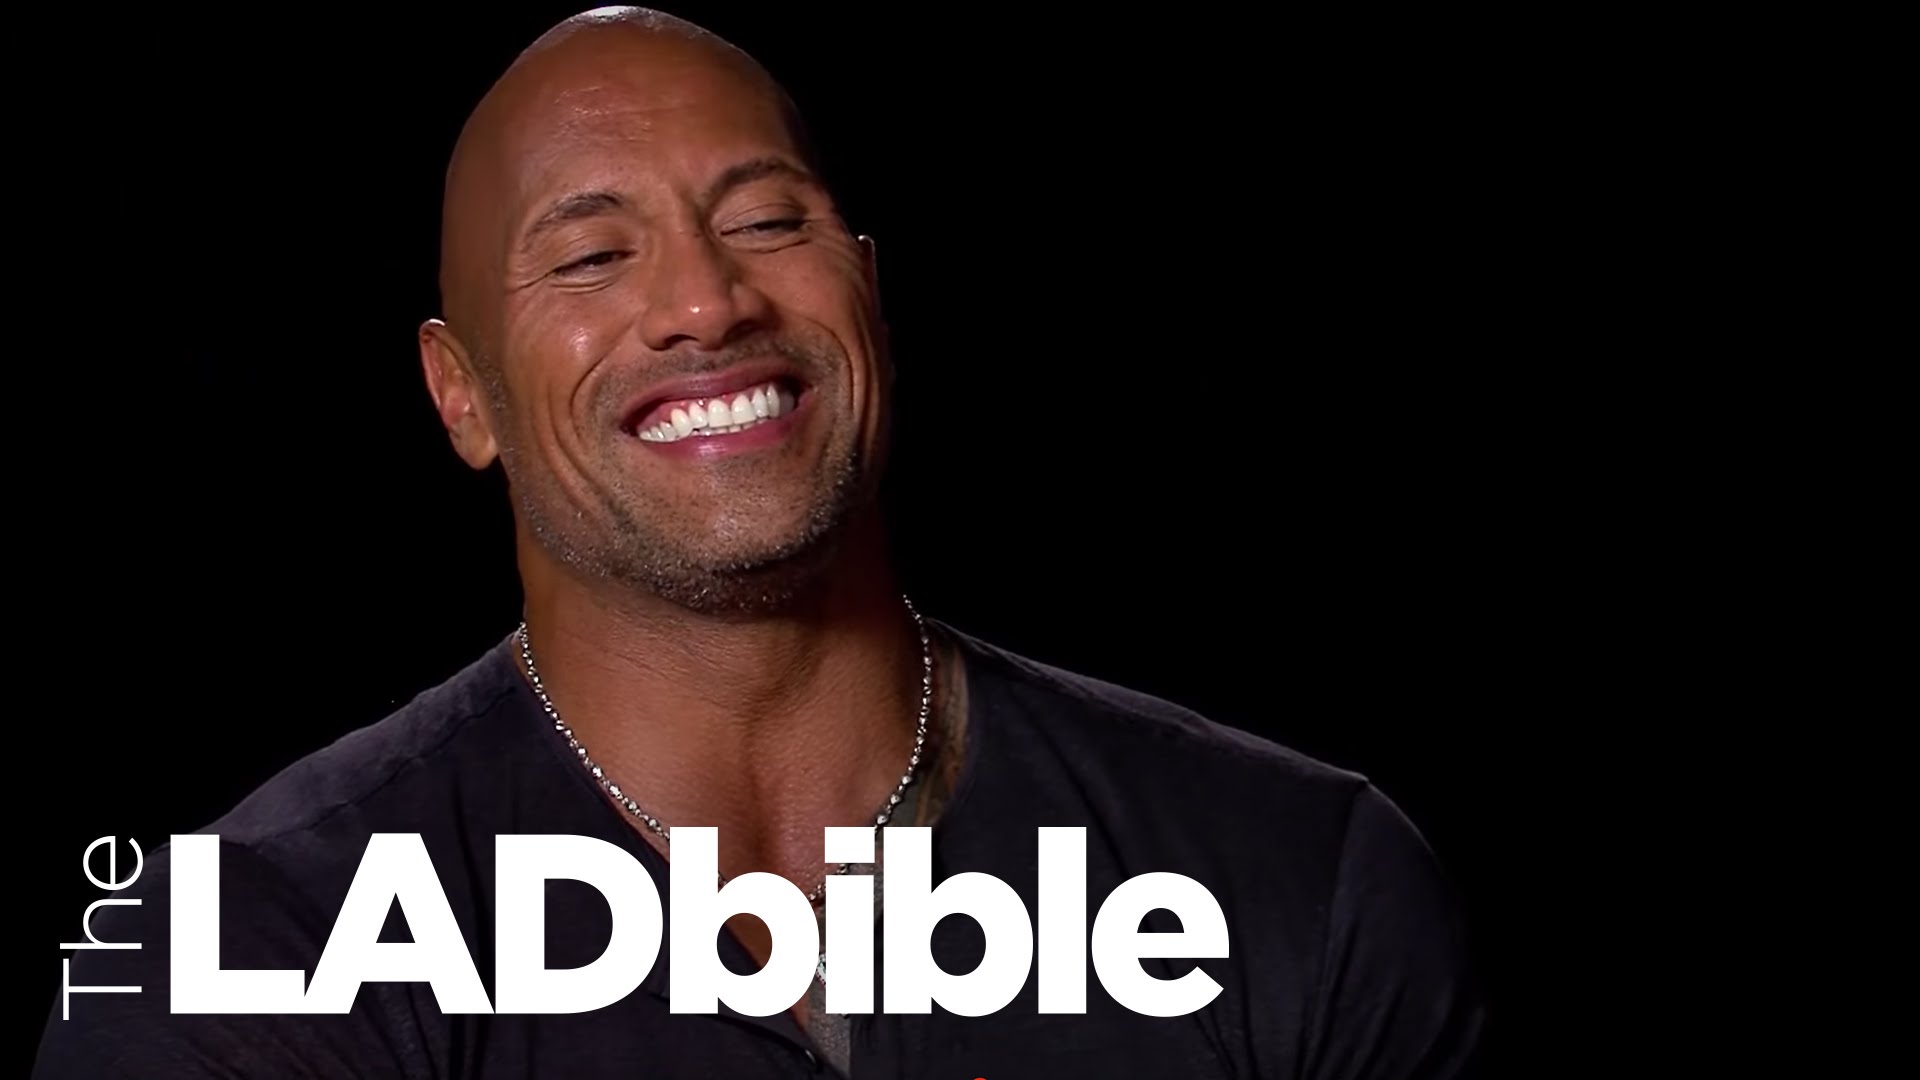 The Rock and Kevin Hart impersonate each other in interview